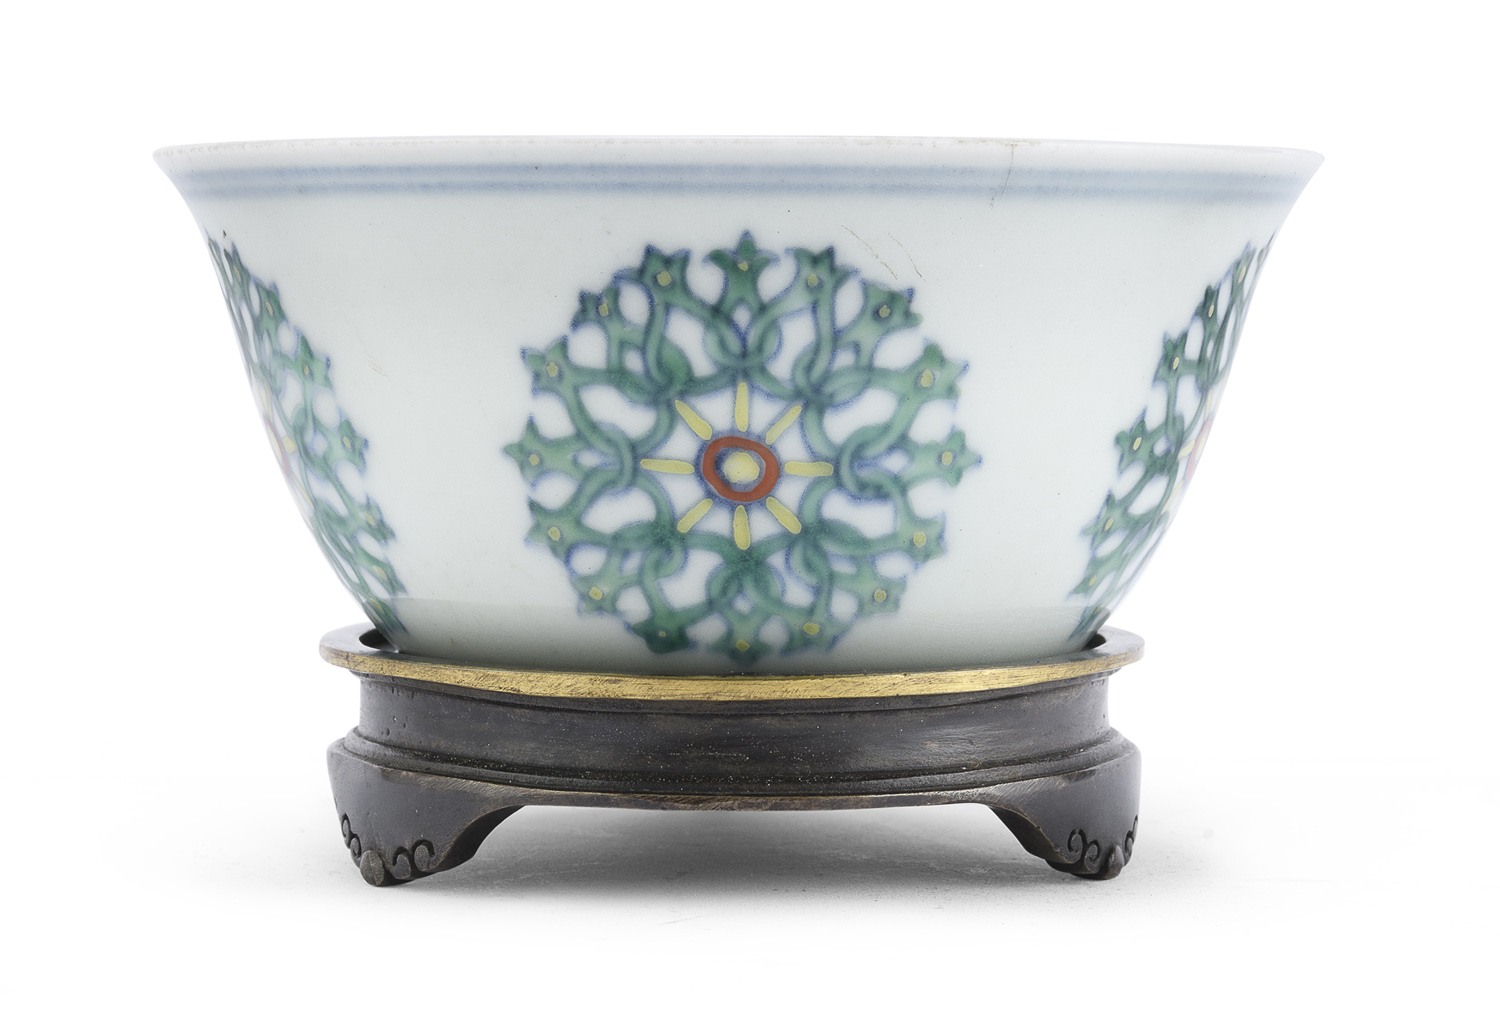 A CHINESE POLYCHROME ENAMELED PORCELAIN BOWL EARLY 20TH CENTURY. HAIRLINE TO THE BASE.